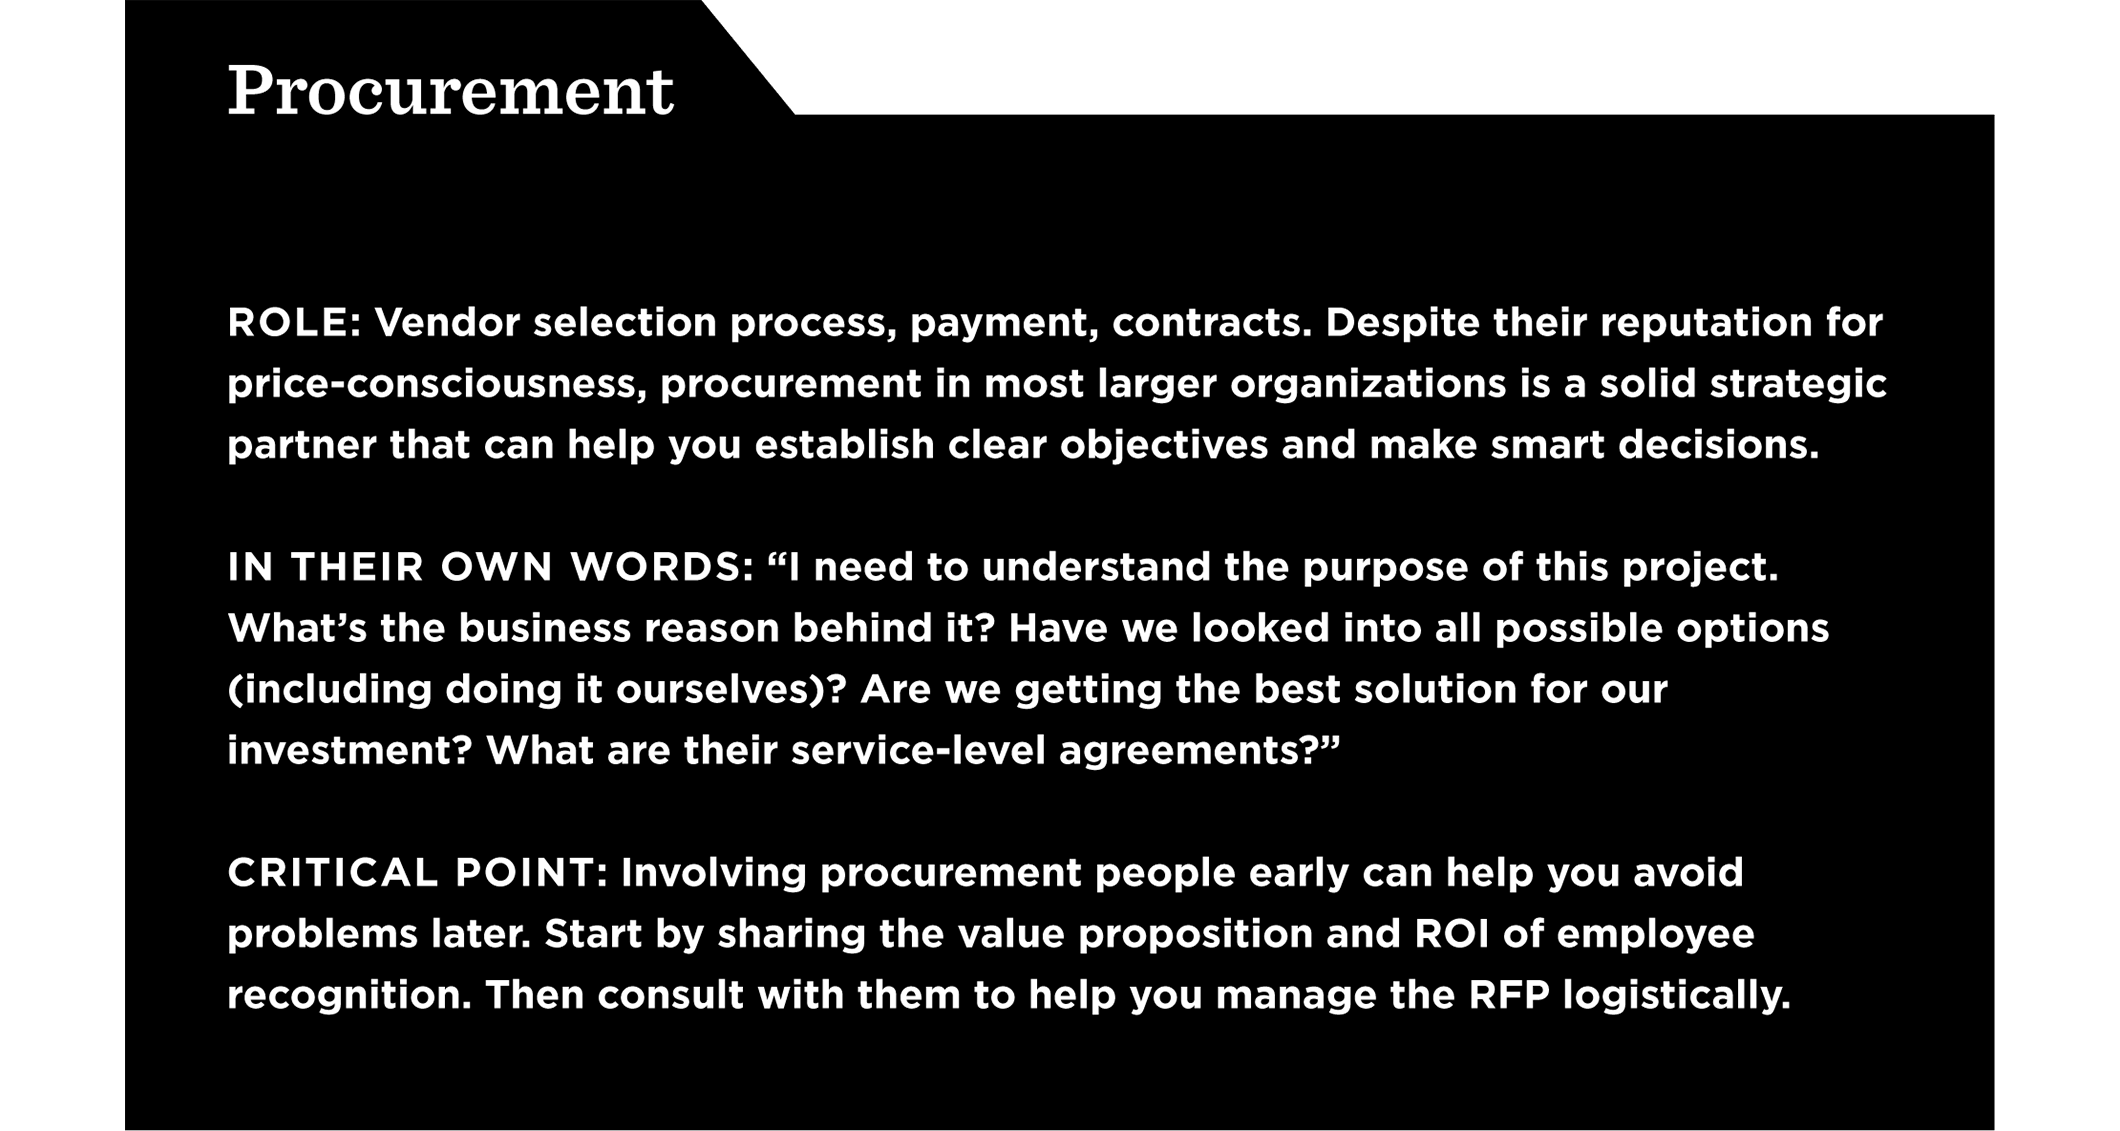 Involving procurement people early can help you avoid problems later. Start by sharing the value proposition and ROI of employee recognition. Then consult with them to help you manage the RFP logistically.